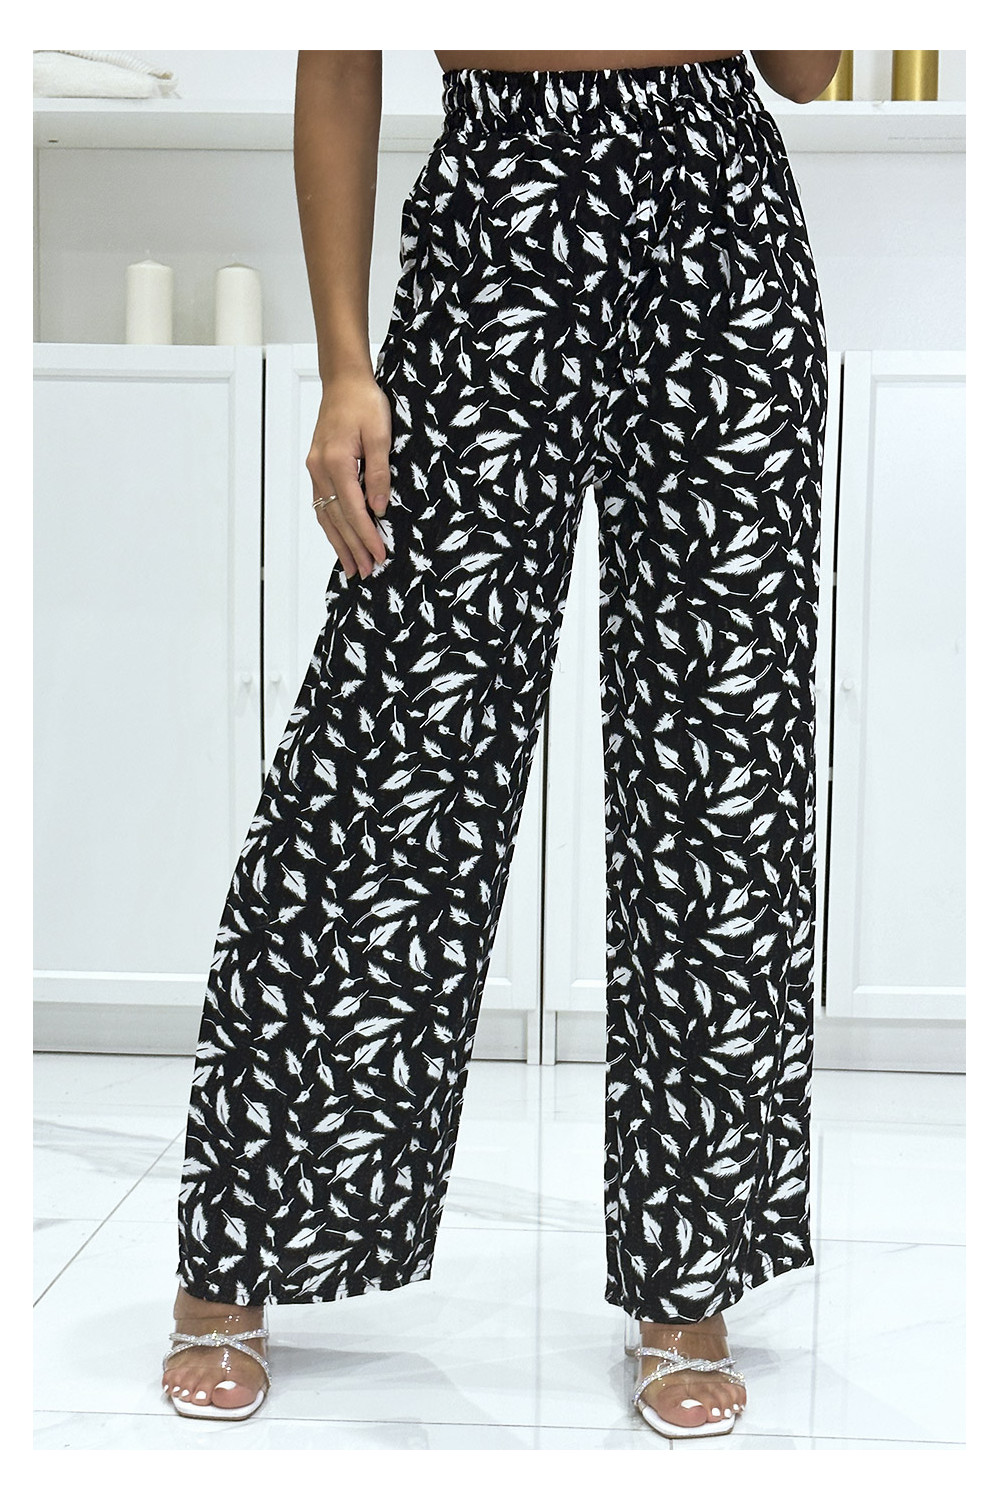 Buy Riya Cotton Embroidered Black White Palazzo pant size 28-32 Online @  ₹649 from ShopClues